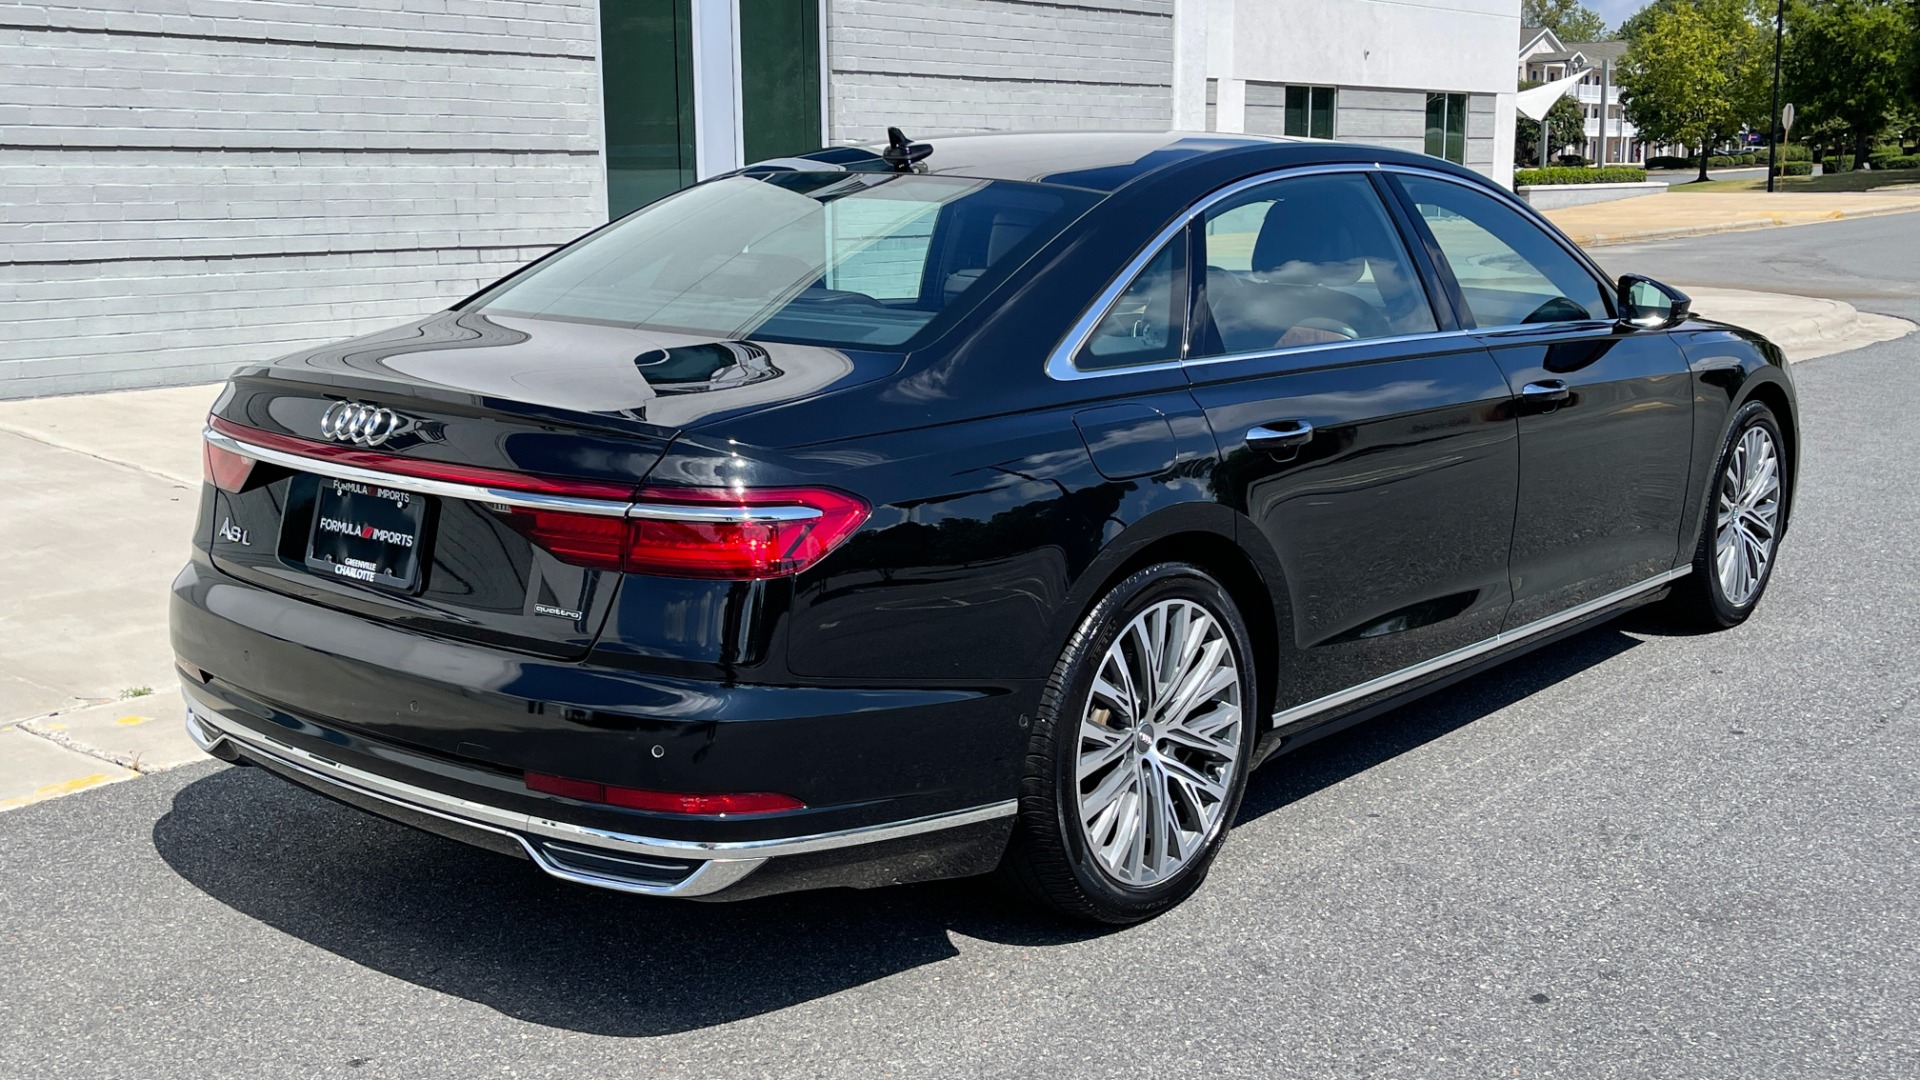 Used 2019 Audi A8L 20IN WHEELS / DRIVER ASSIST / COLD WEATHER / EXECUTIVE PACKAGE for sale $53,995 at Formula Imports in Charlotte NC 28227 4